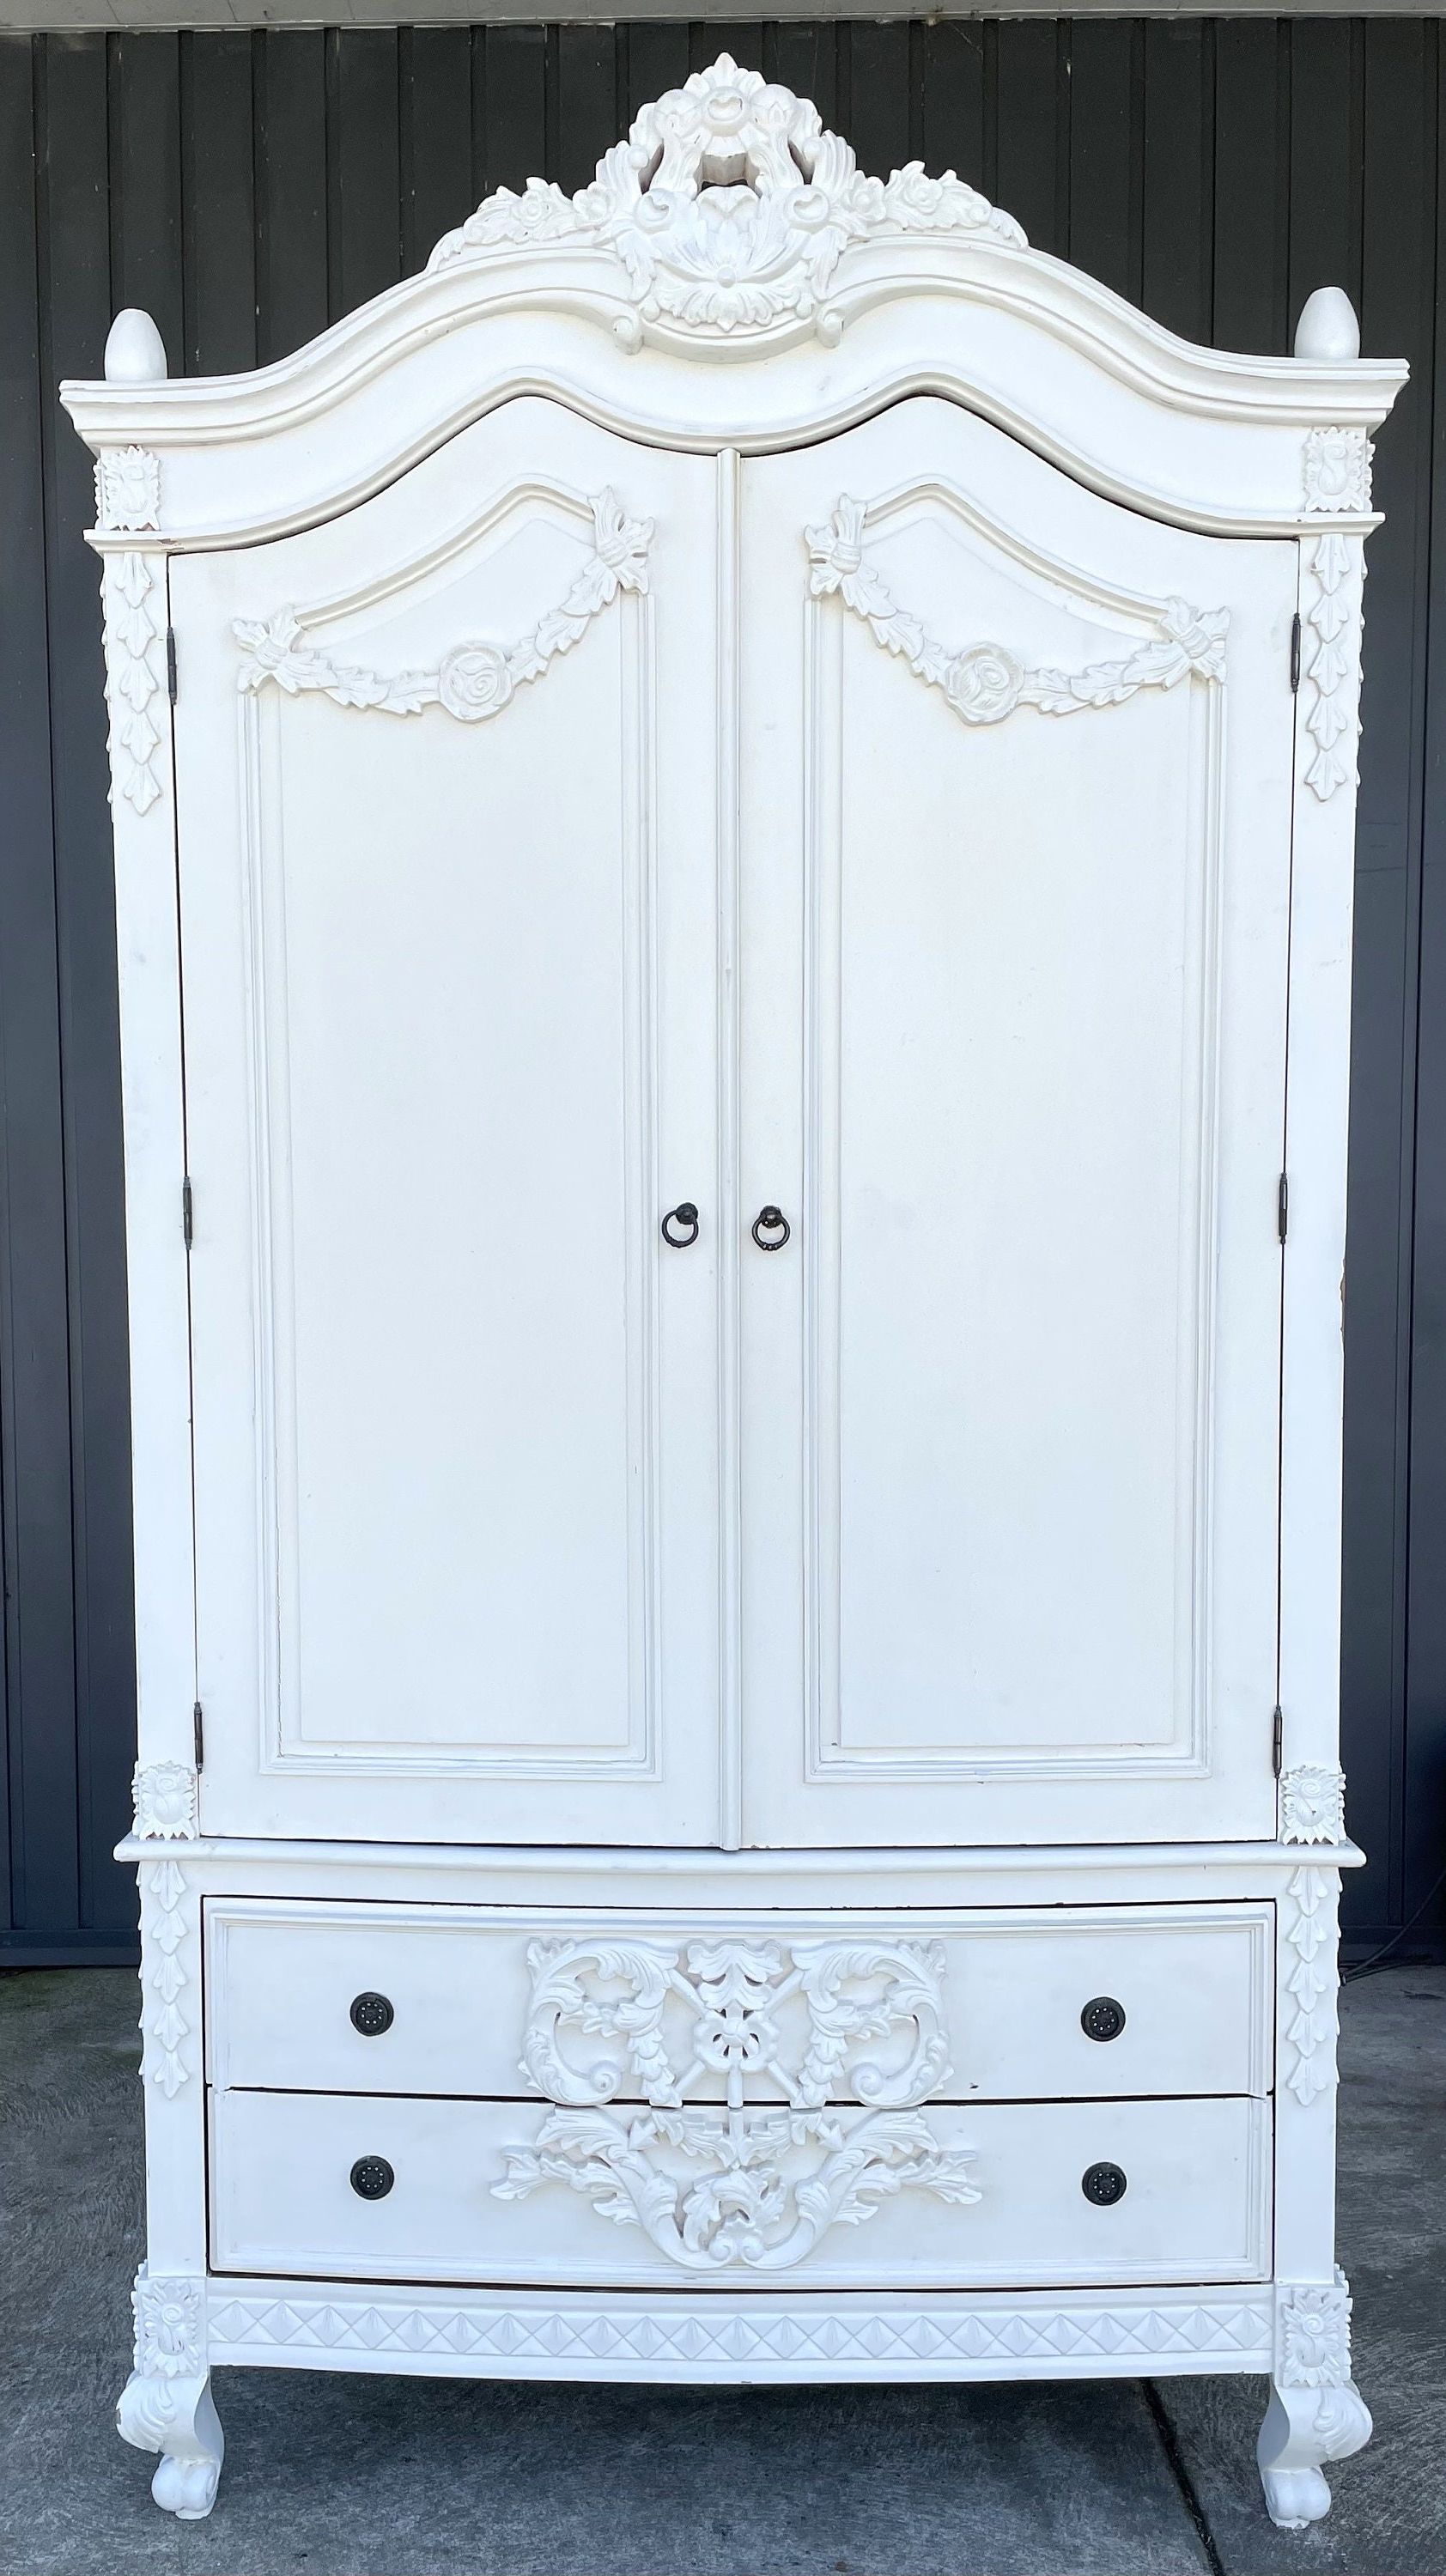 Shabby Chic Distressed White Vintage Style French Baroque – Etsy In White Shabby Chic Wardrobes (View 2 of 20)